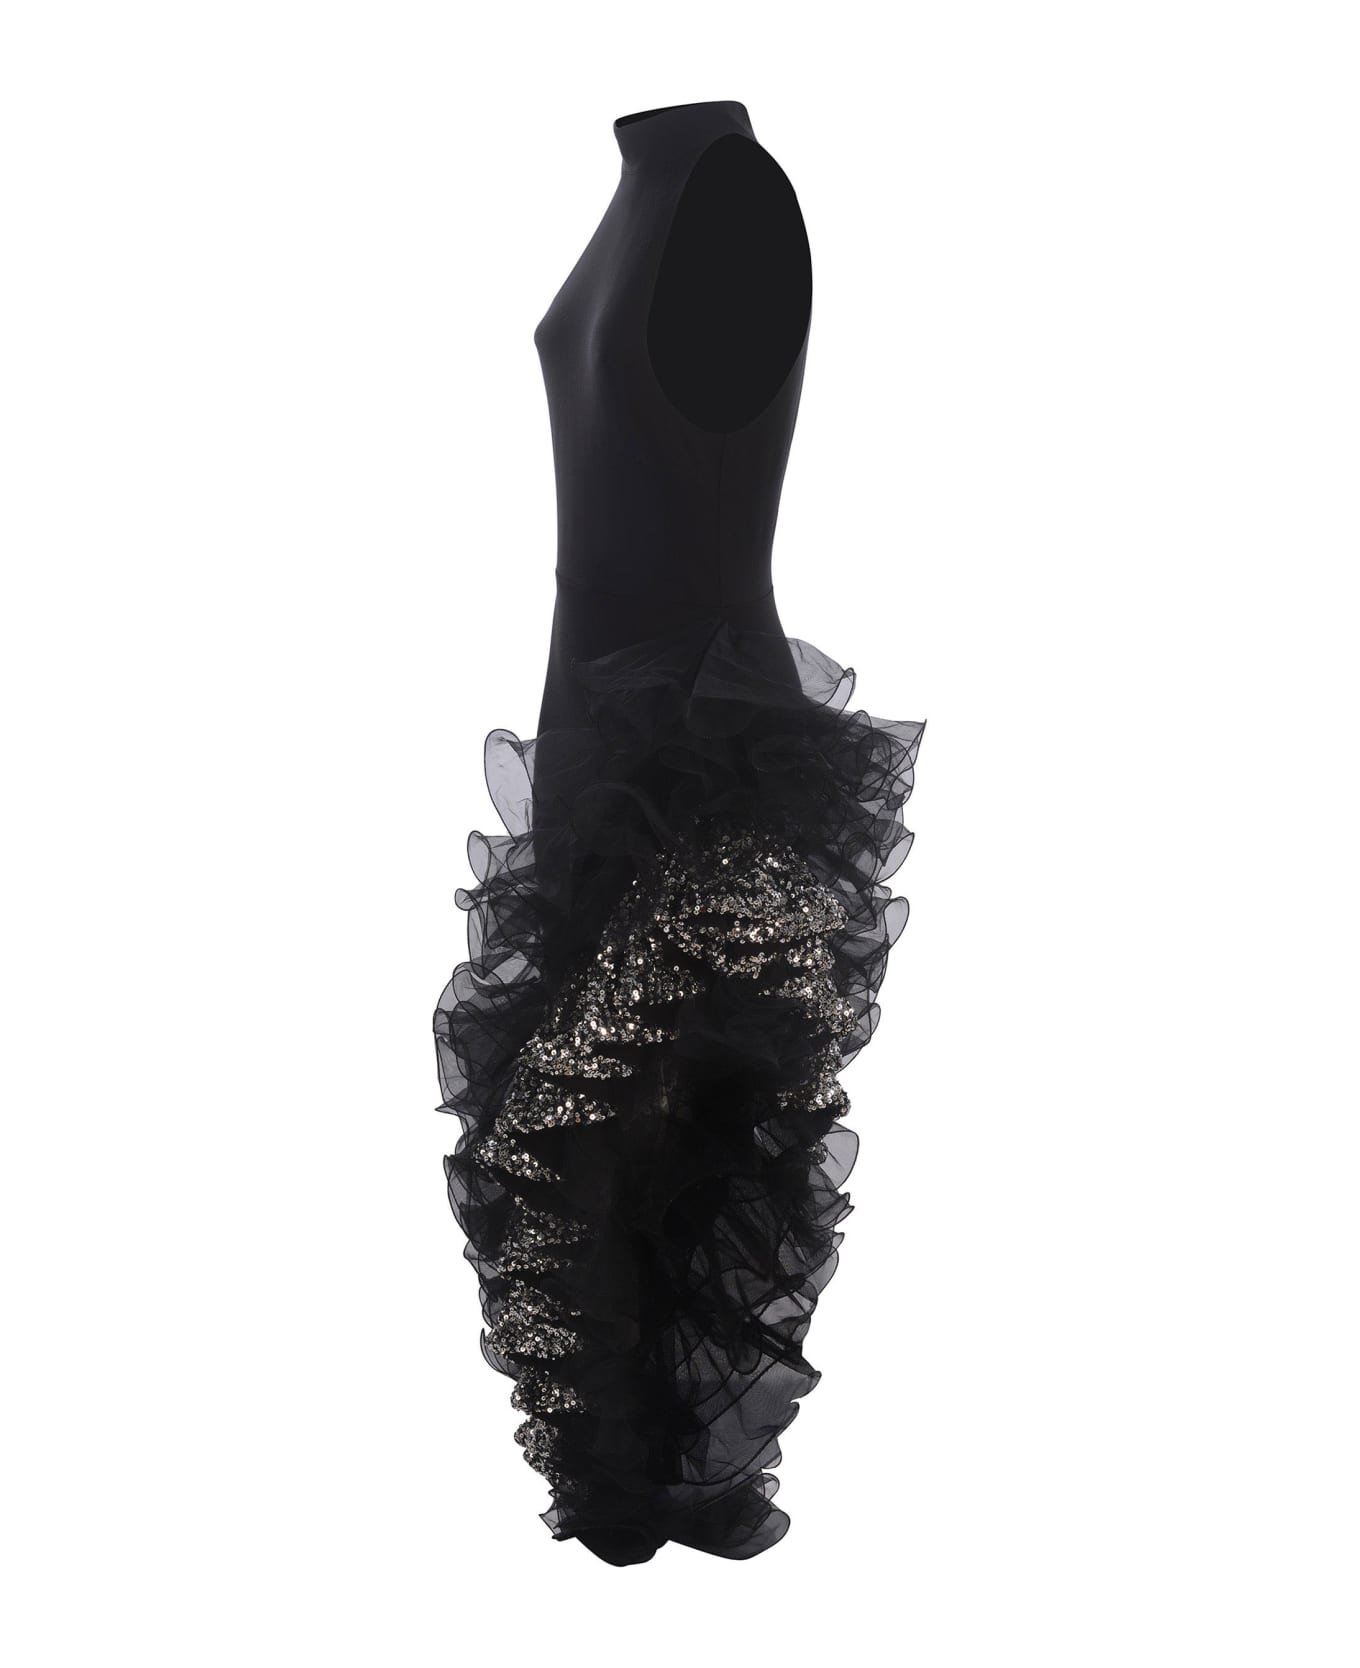 Rotate by Birger Christensen Long Dress Rotate Made With Ruffles And Sequins - Nero